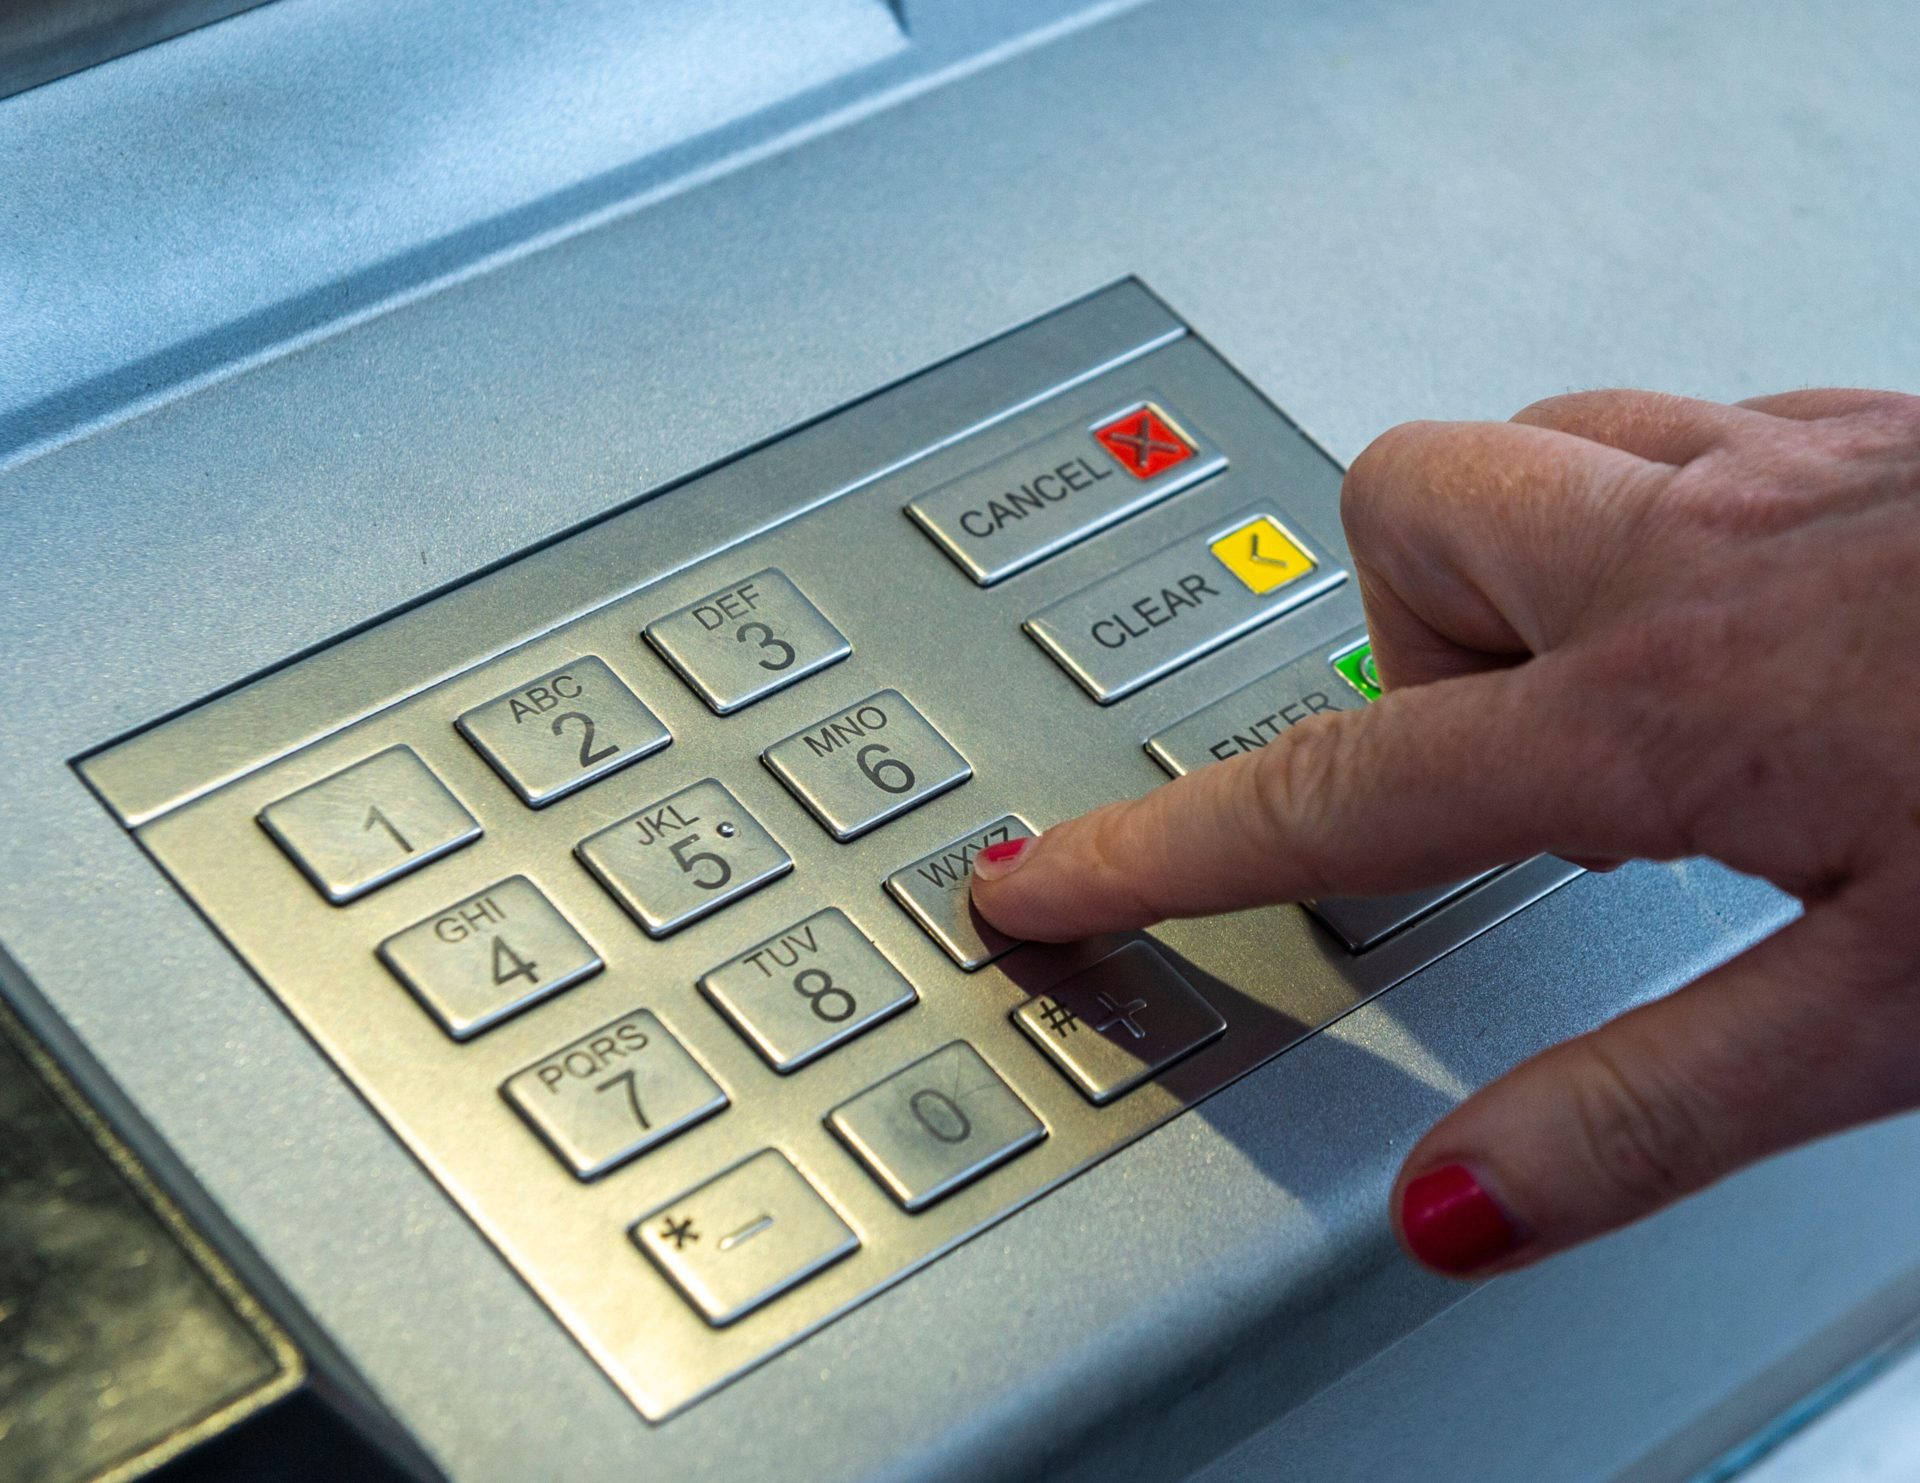 A woman entering her PIN into an ATM in September 2020.